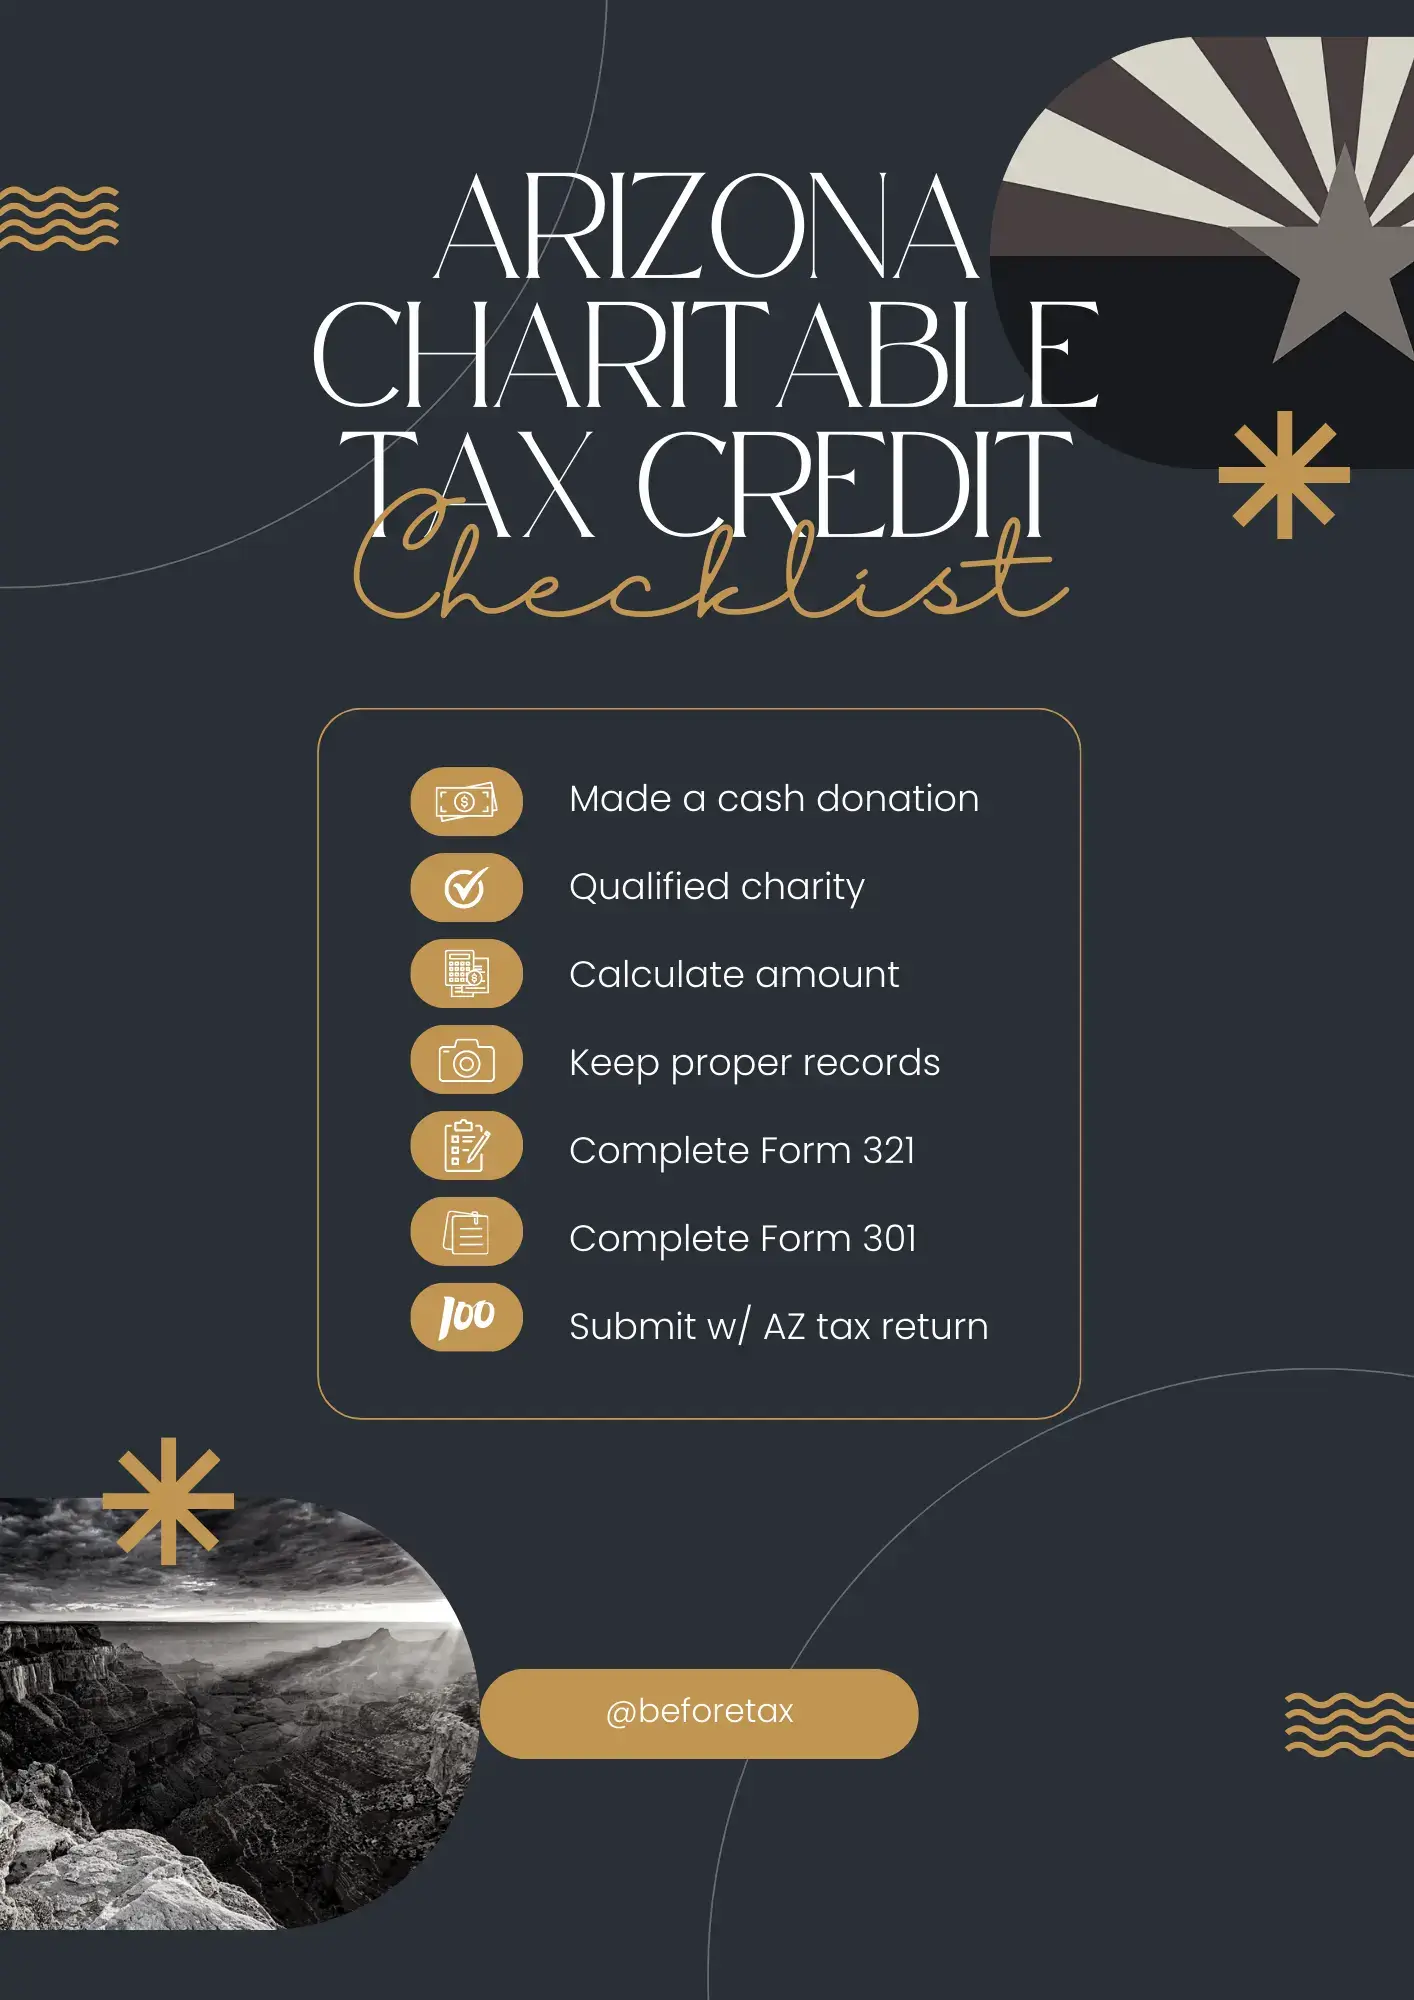 Checklist of 7 items: 1. Made a cash donation, 2. qualified charity, 3. calculate amount, 4. proper records, 5. AZ Form 321, 6. AZ form 301, 7. Submit with AZ tax return